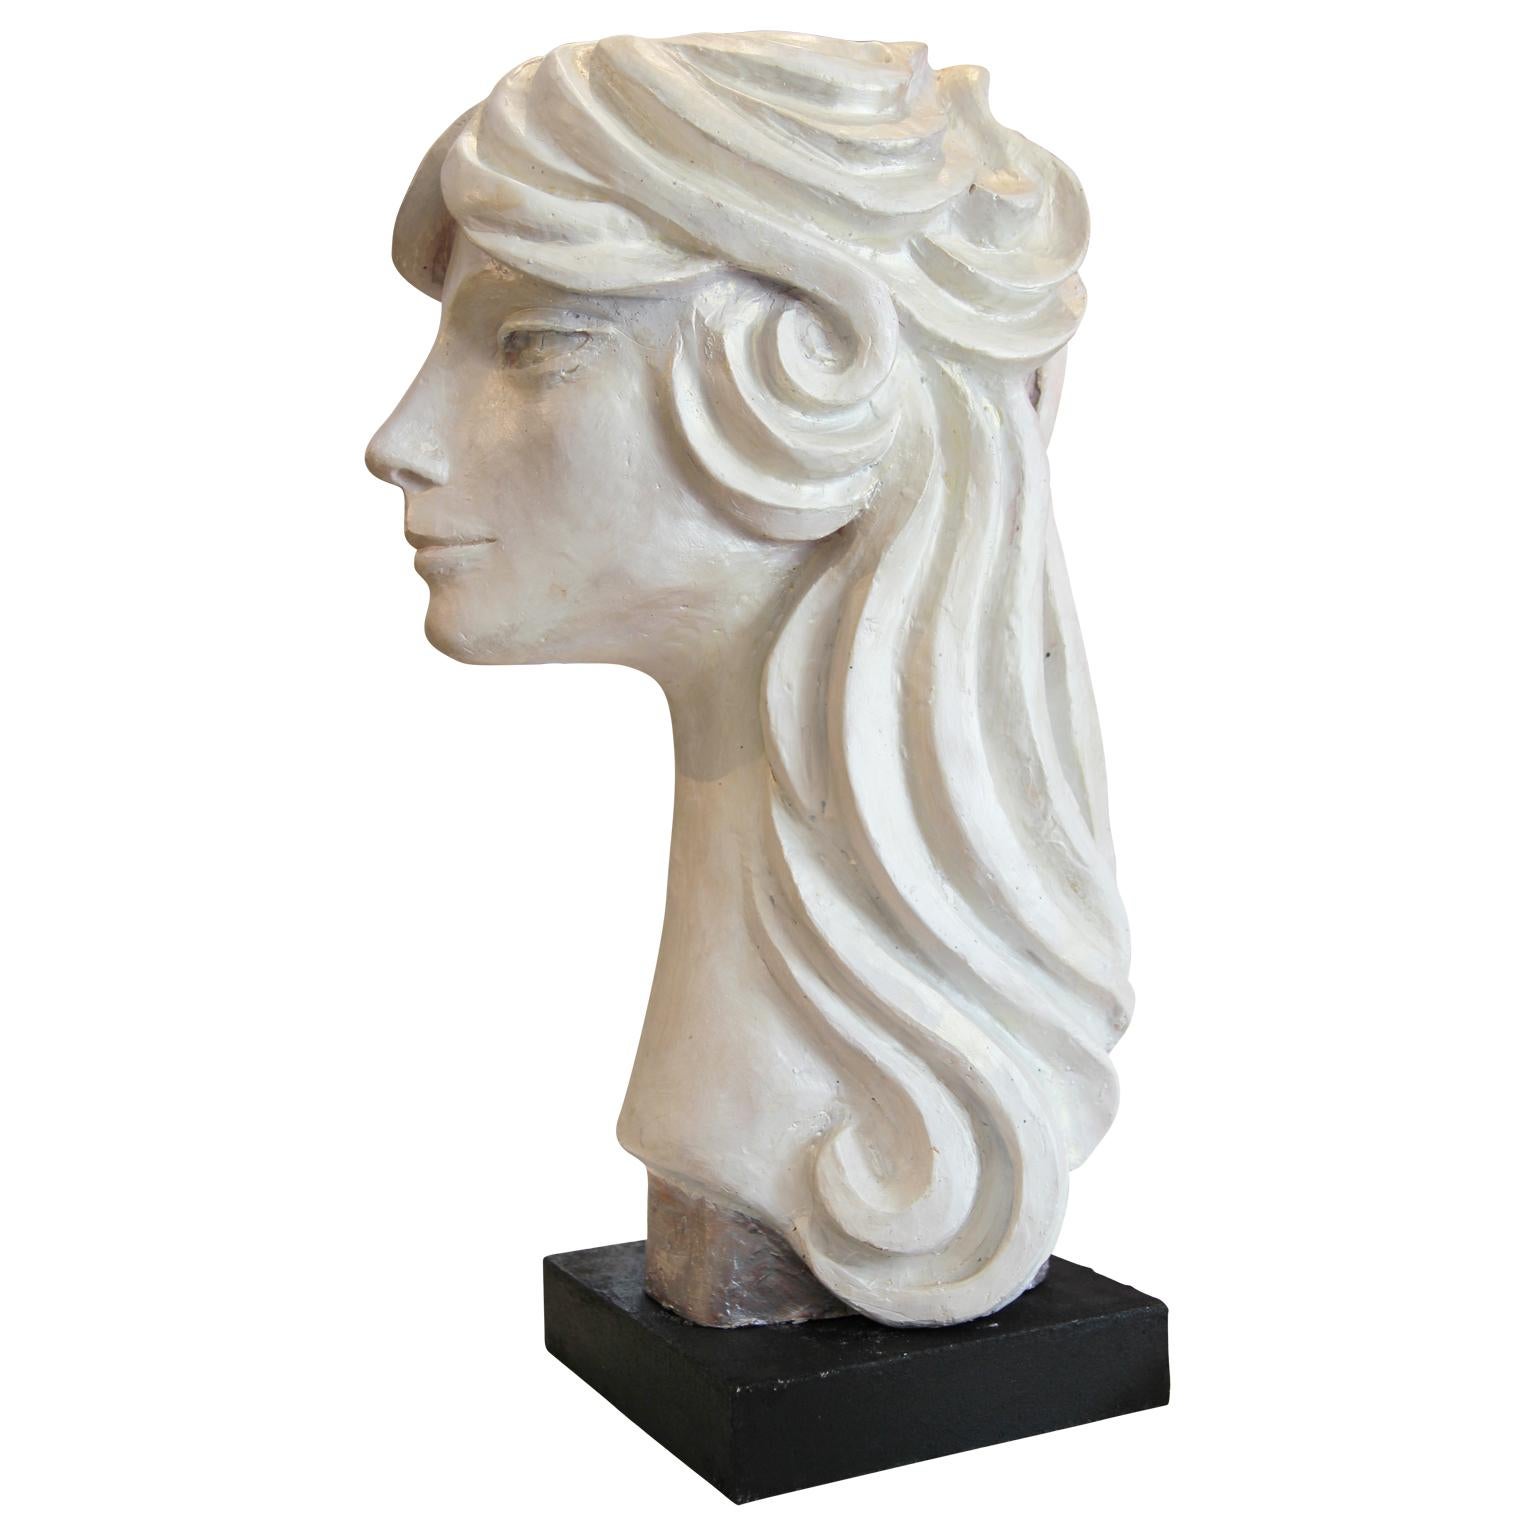 Modern abstract cast stone portrait bust sculpture by Houston, Texas artist David Adickes. The work is modeled after Adickes' friend Julie Burrows and features sharp facial features framed by swooping hair. Signed by artist on the back of the neck.